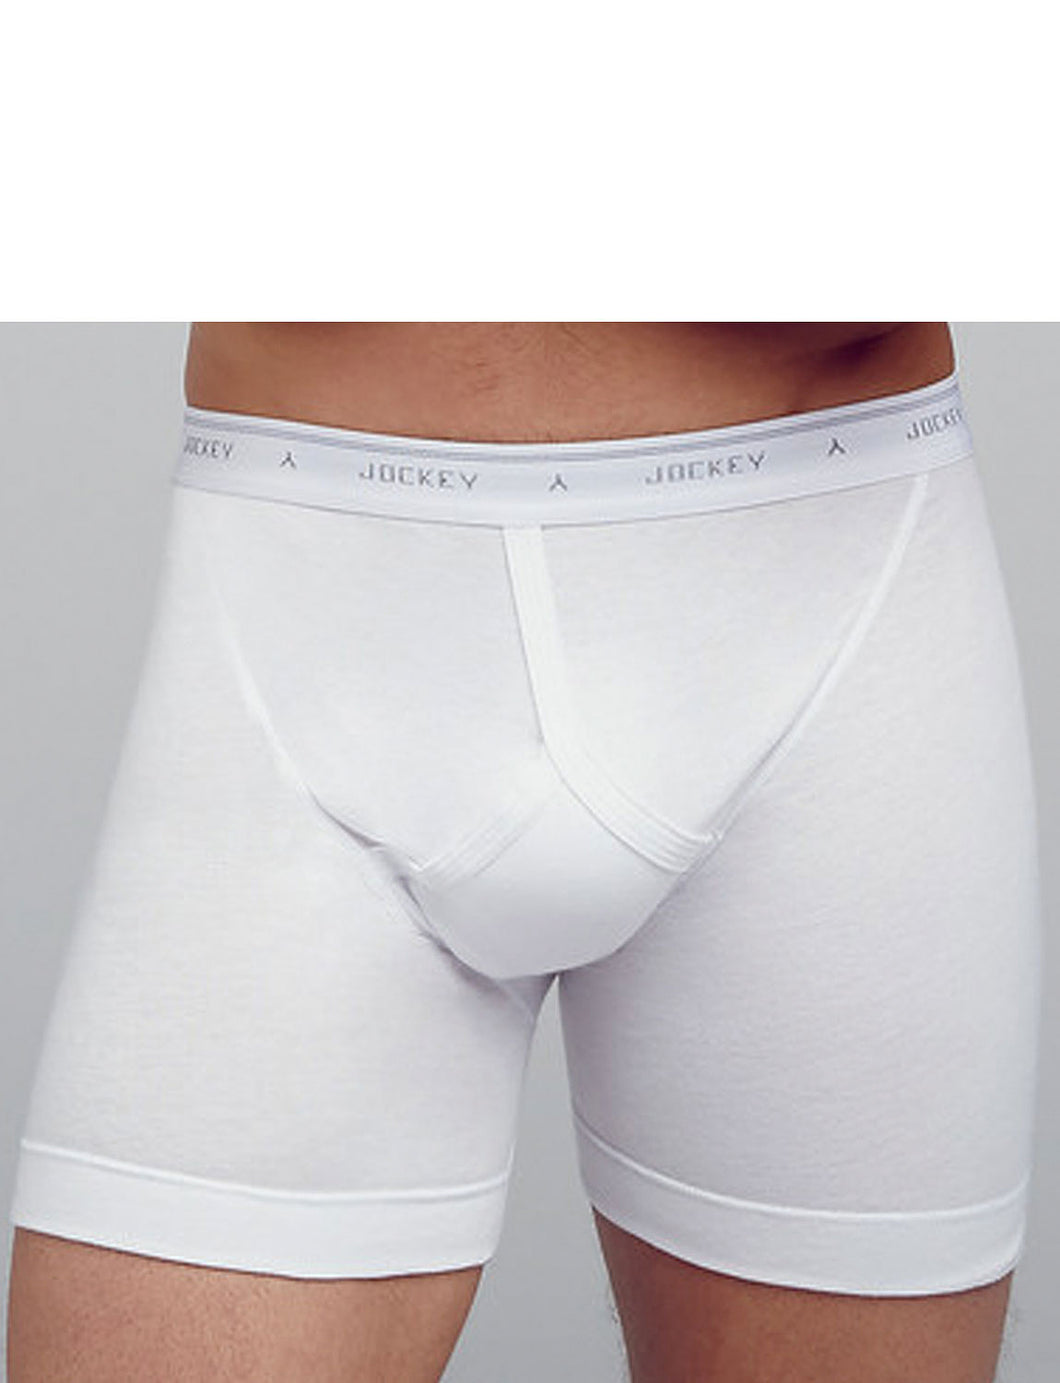 Jockey UK Classic Cotton Midway Brief with Y-Front Fly - White (3 pack)